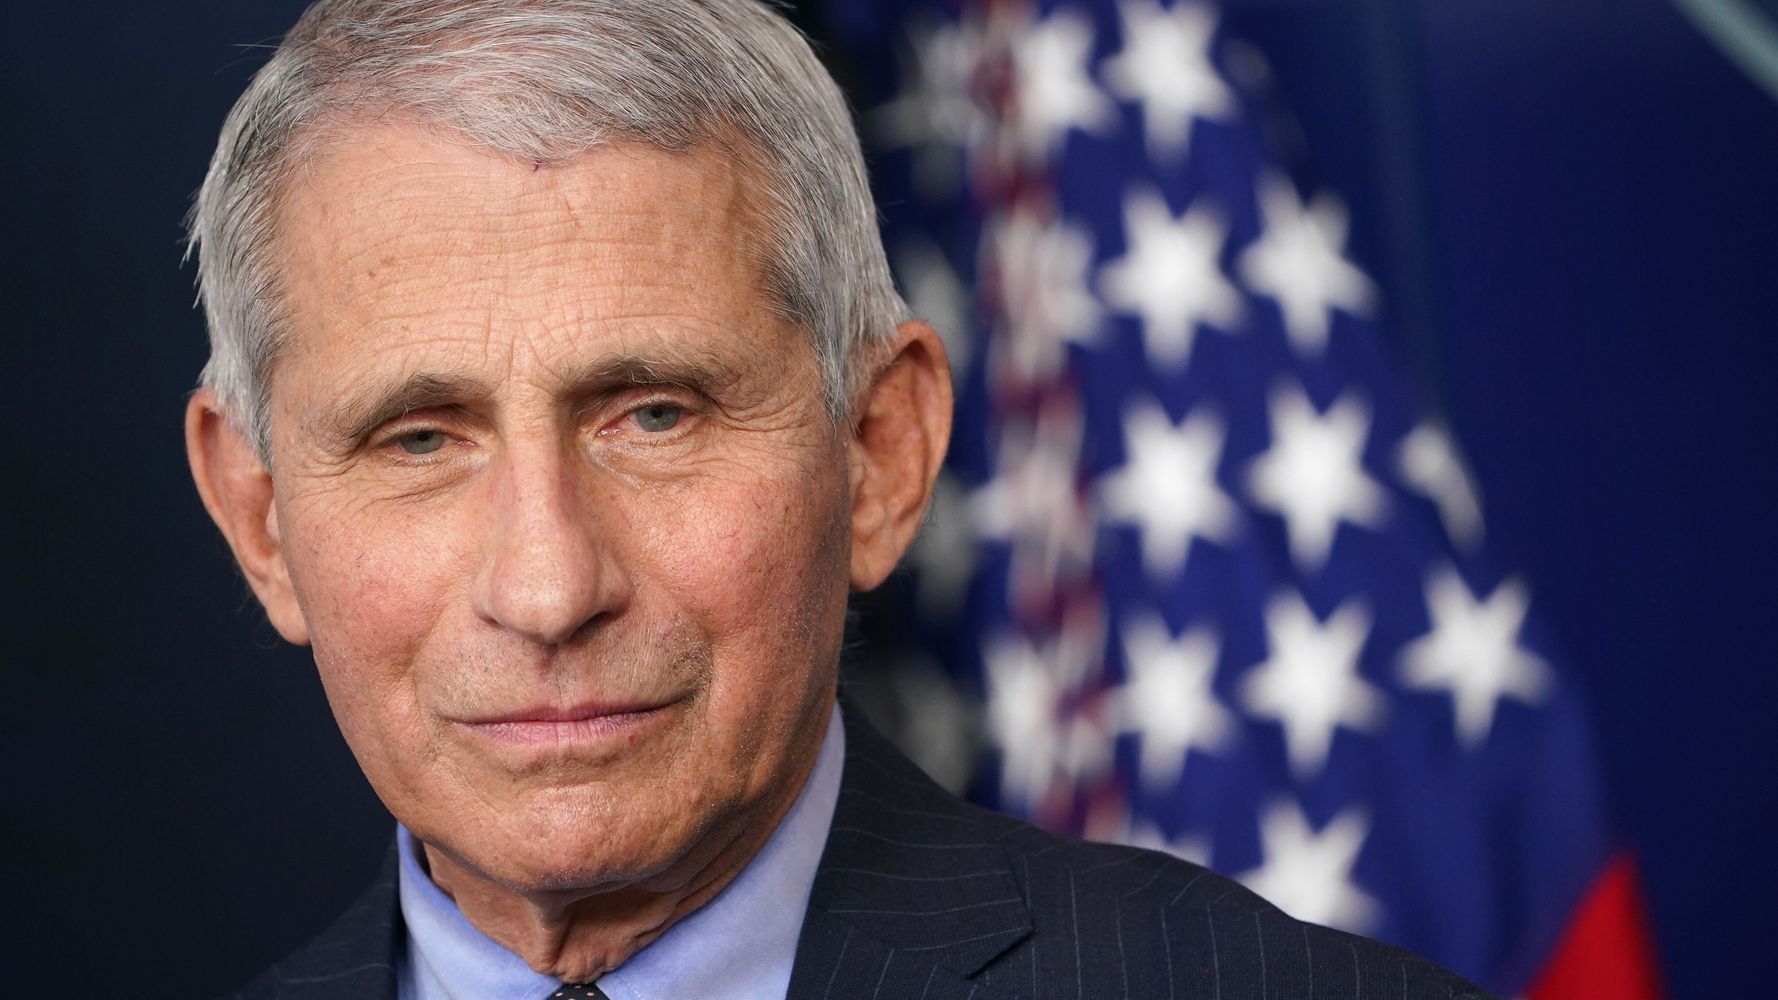 Anthony Fauci is sounding the alarm about the “disturbingly high” level of the new COVID-19 cases